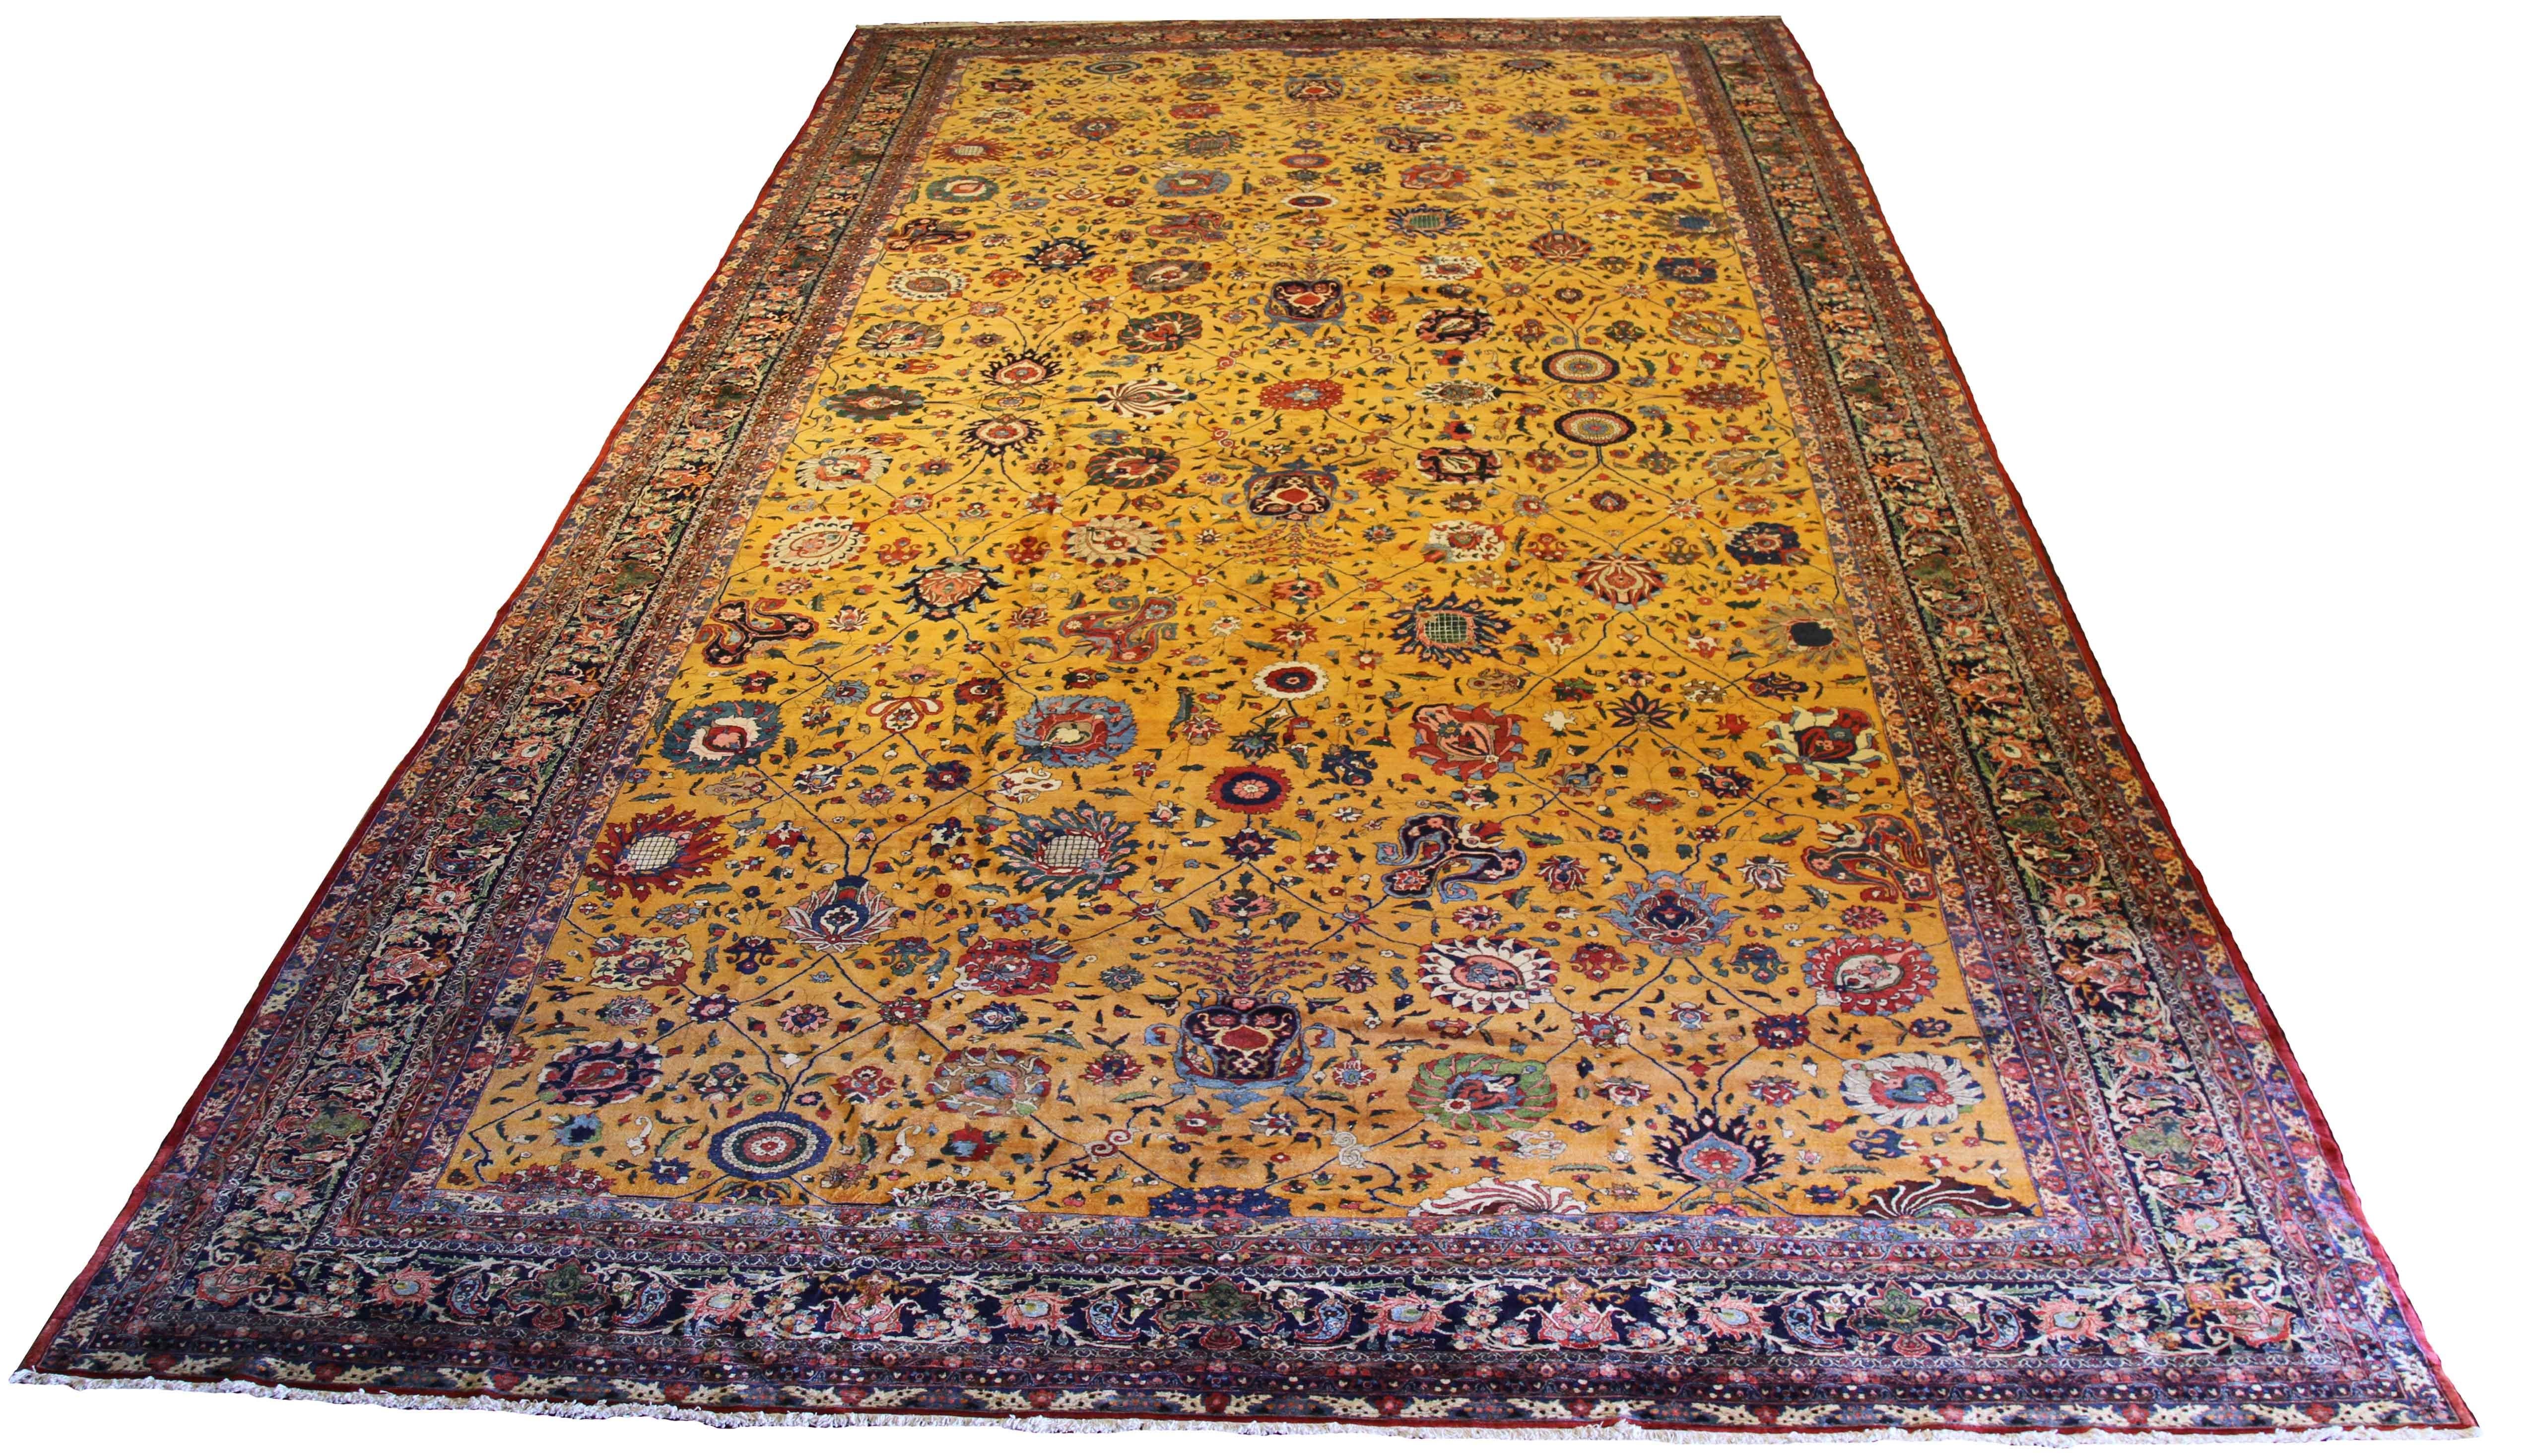 Large antique Persian rug handwoven from the finest sheep’s wool and colored with all-natural vegetable dyes that are safe for humans and pets. It’s a traditional Isfahan Masterpiece design featuring colored floral details on a golden field. It's a